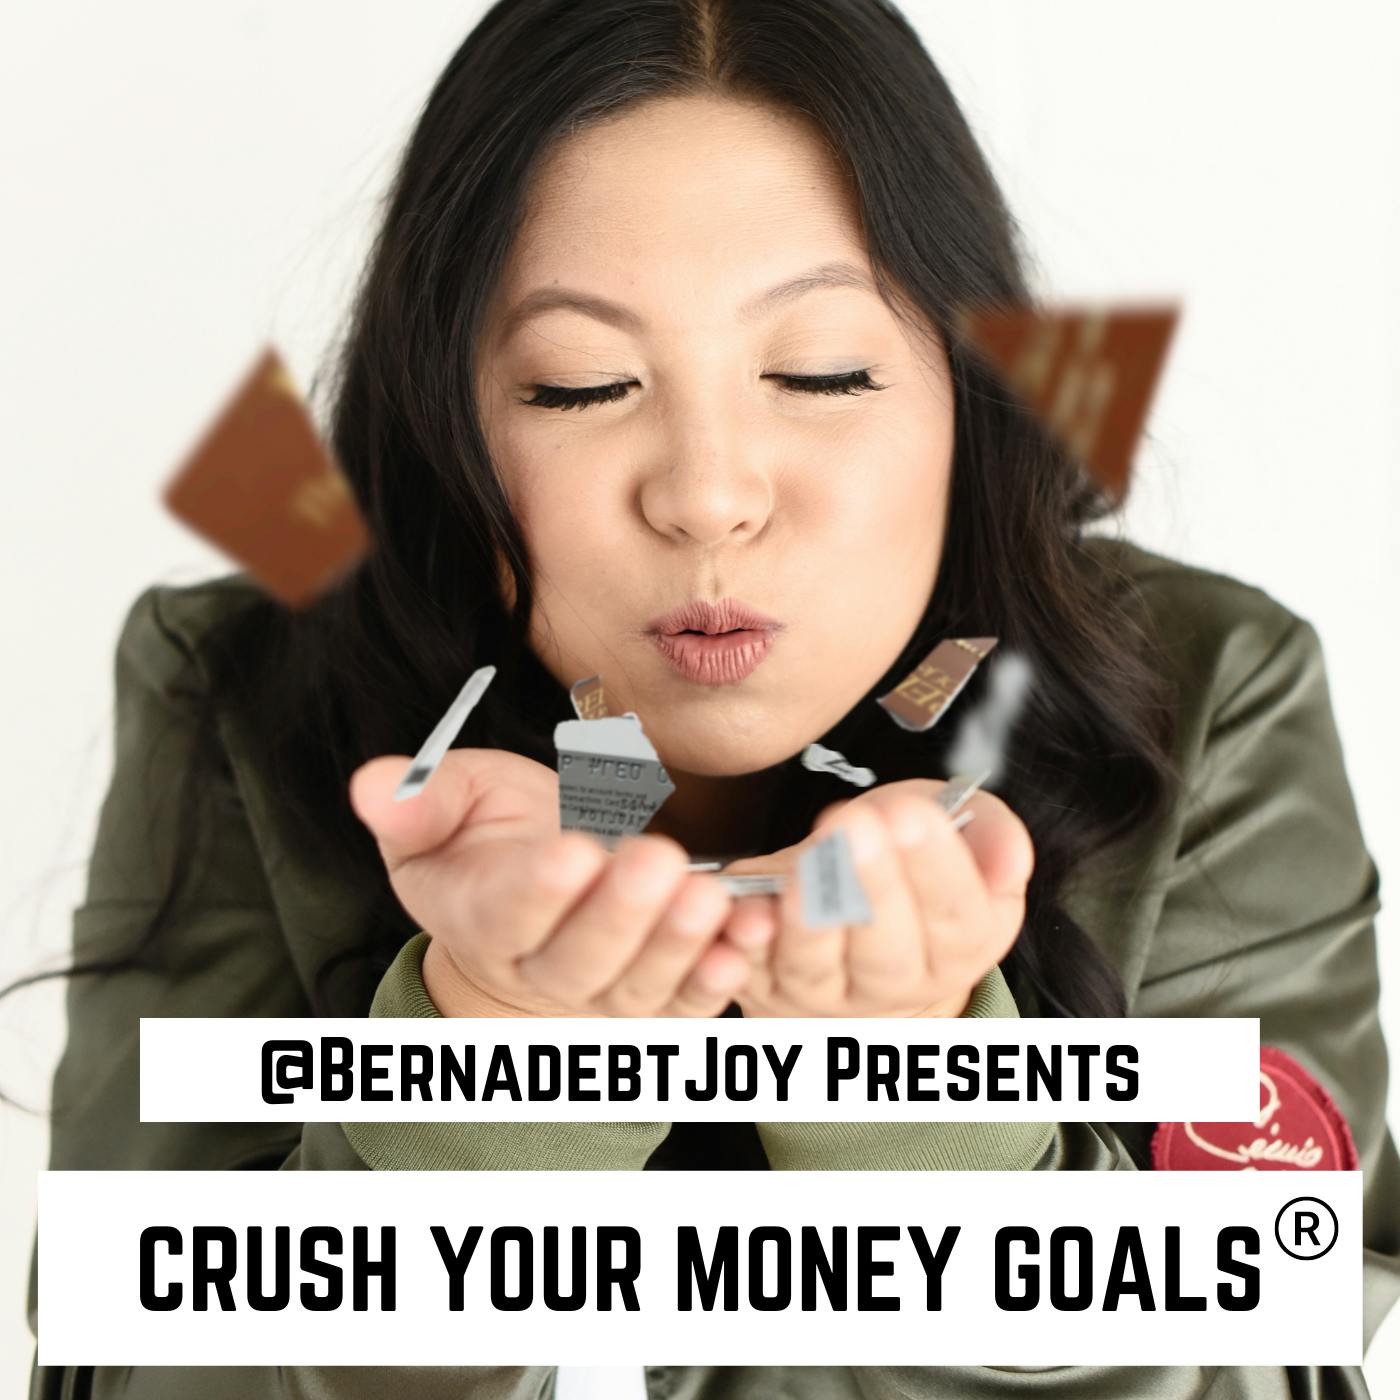 What happens when you finally reach your money goals